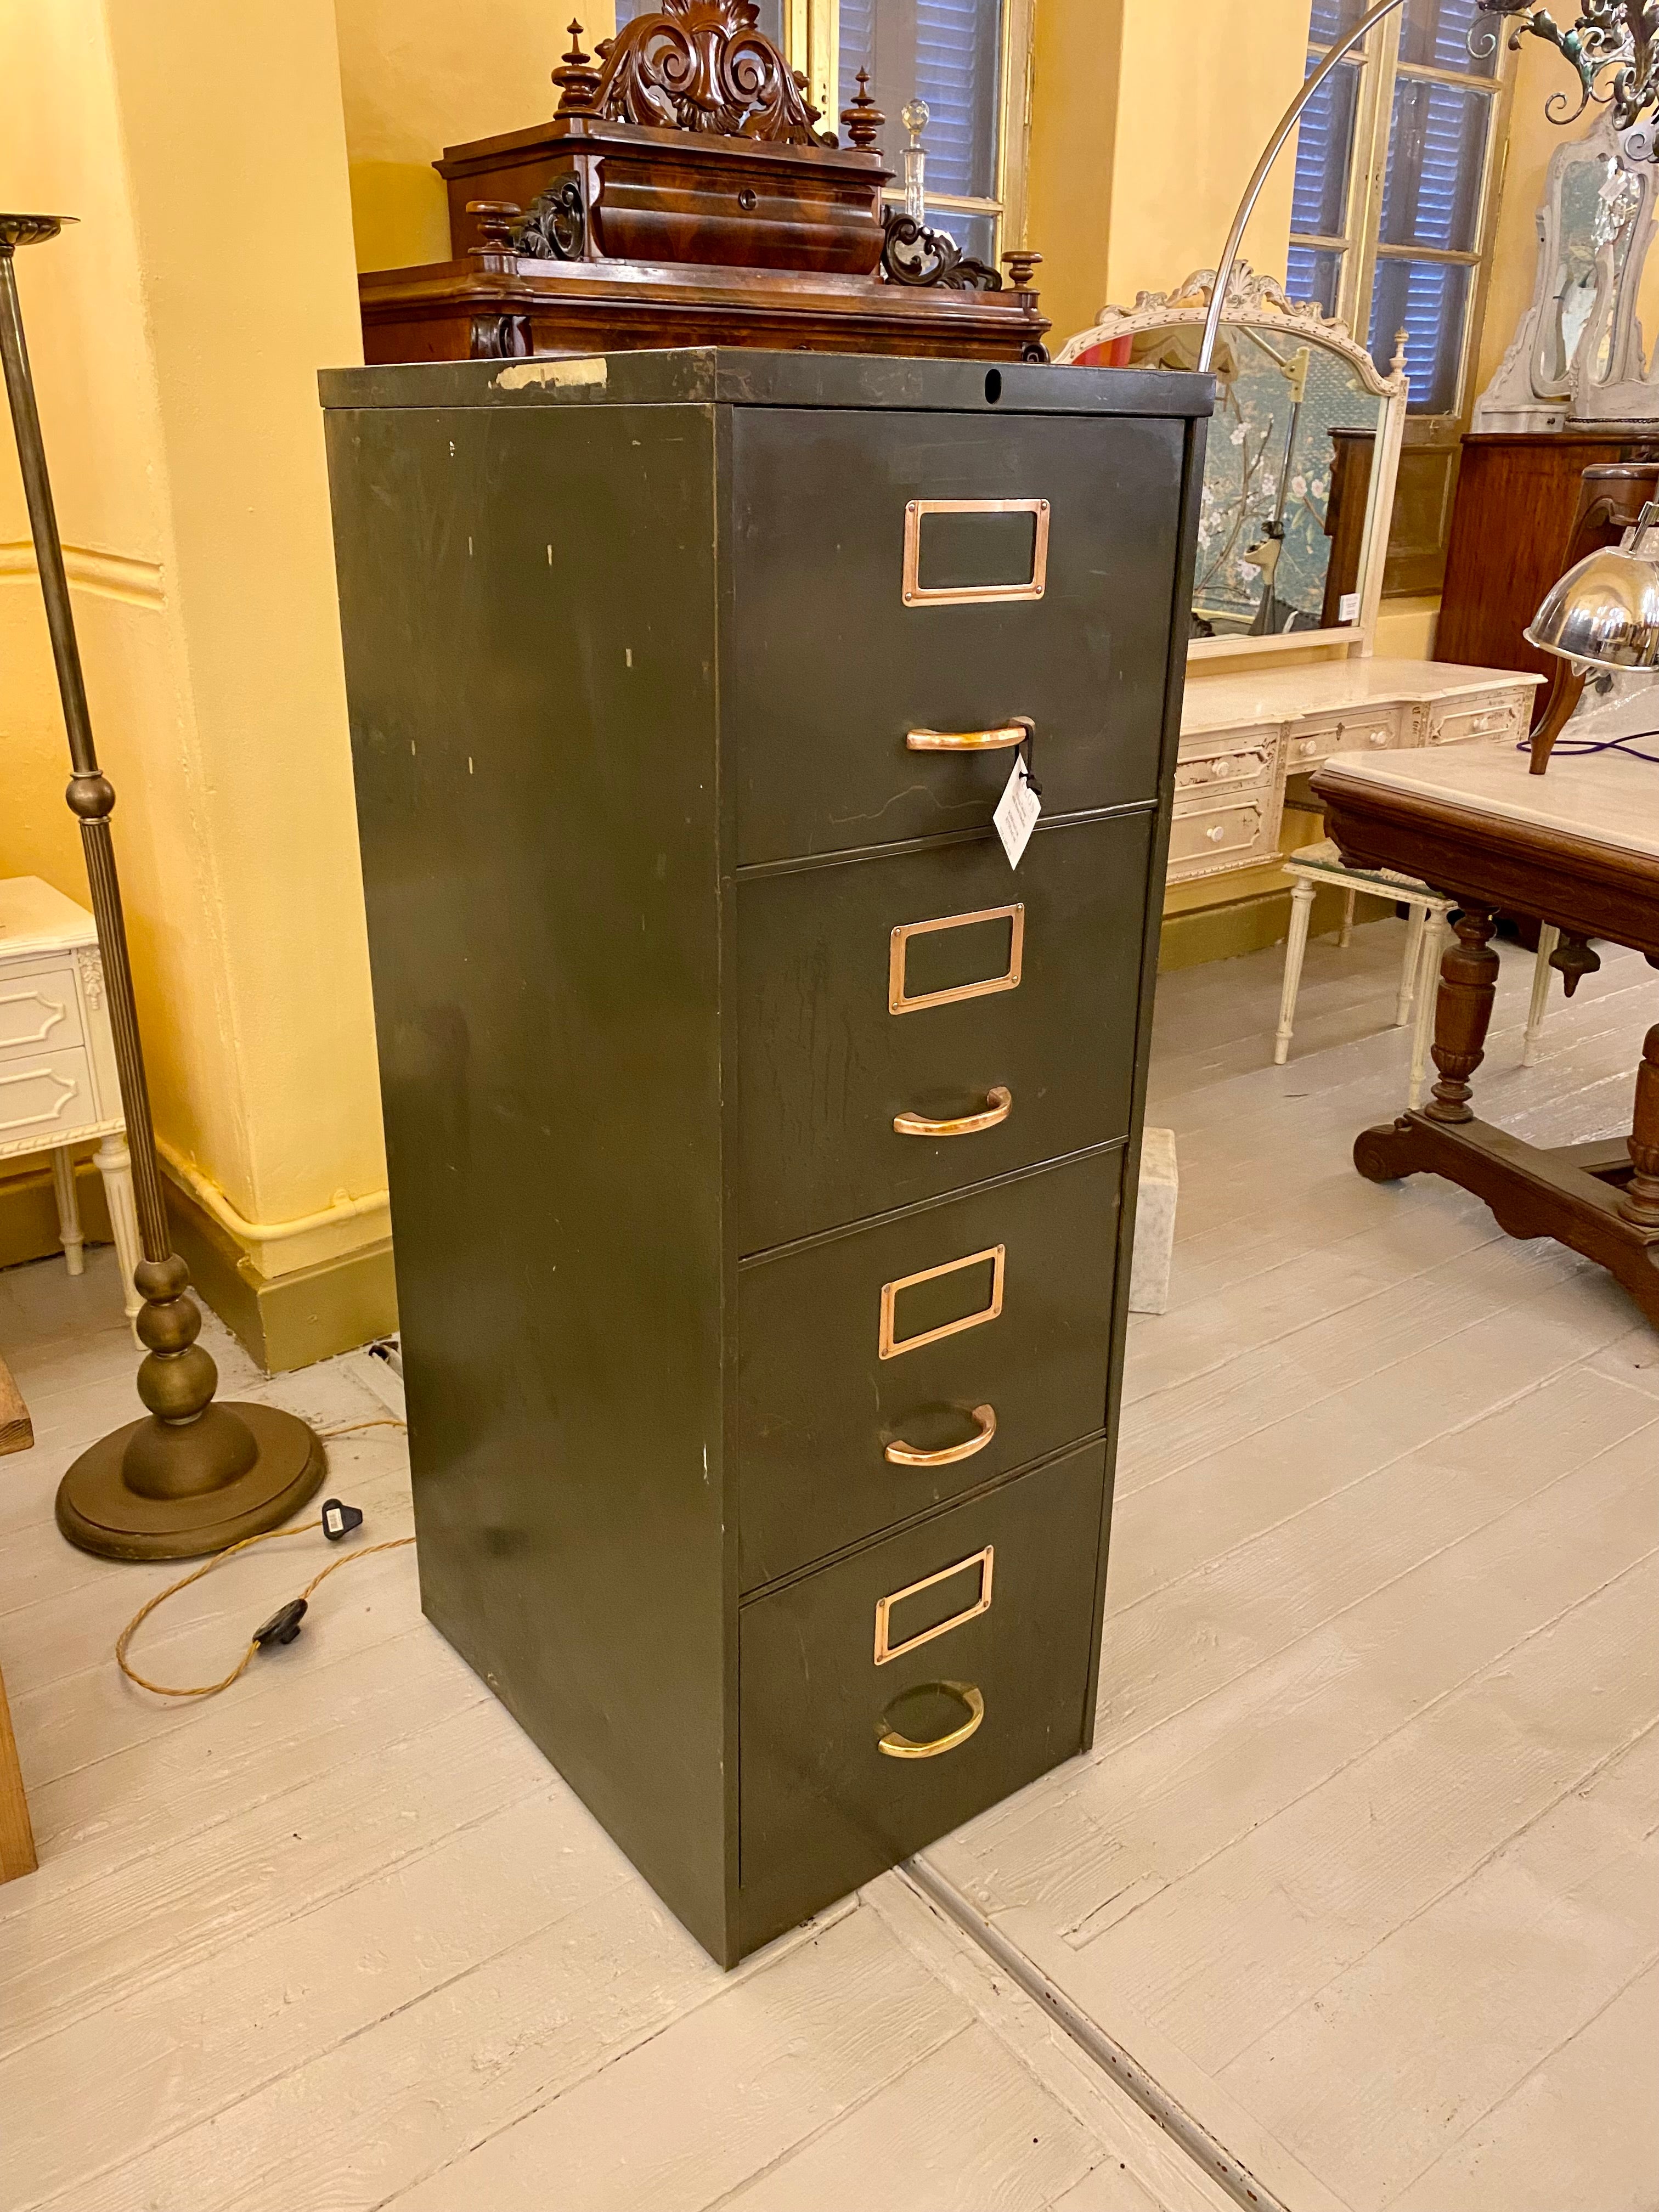 Vintage Filing Cabinet with Brass Handles